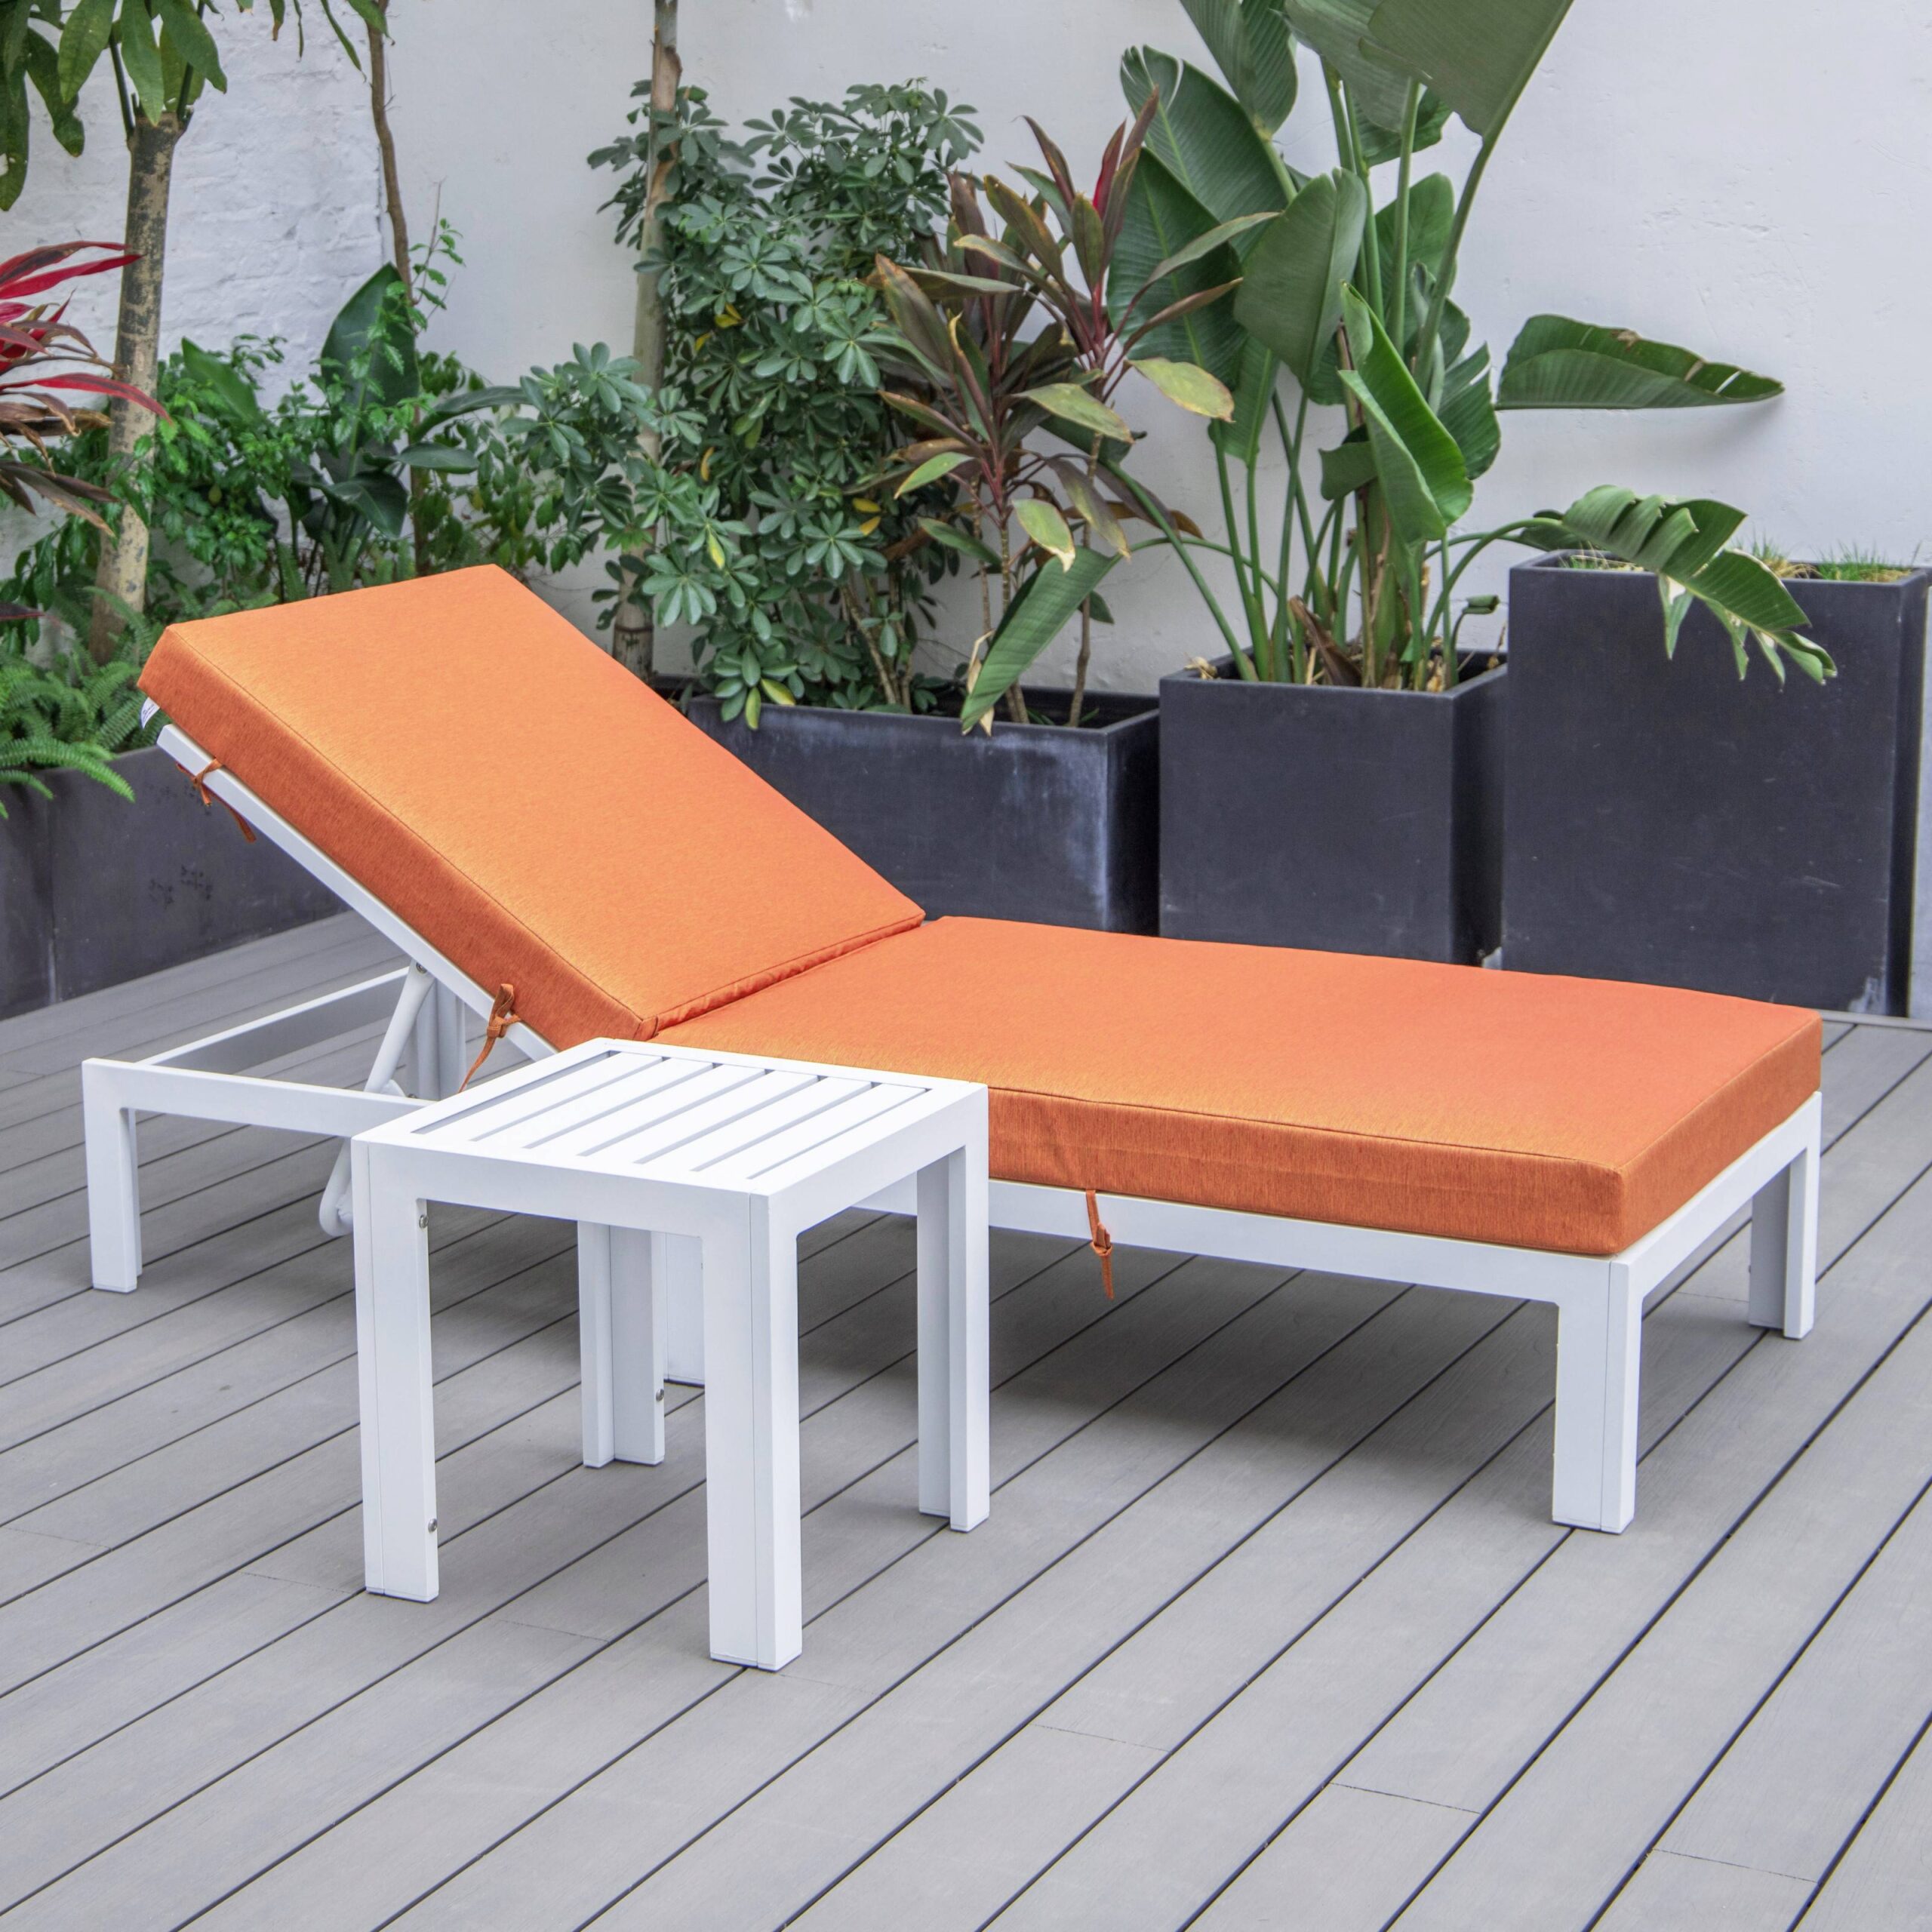 LeisureMod Chelsea Modern White Aluminum Outdoor Chaise Lounge Chair With Side Table & Orange Cushions - image 4 of 13